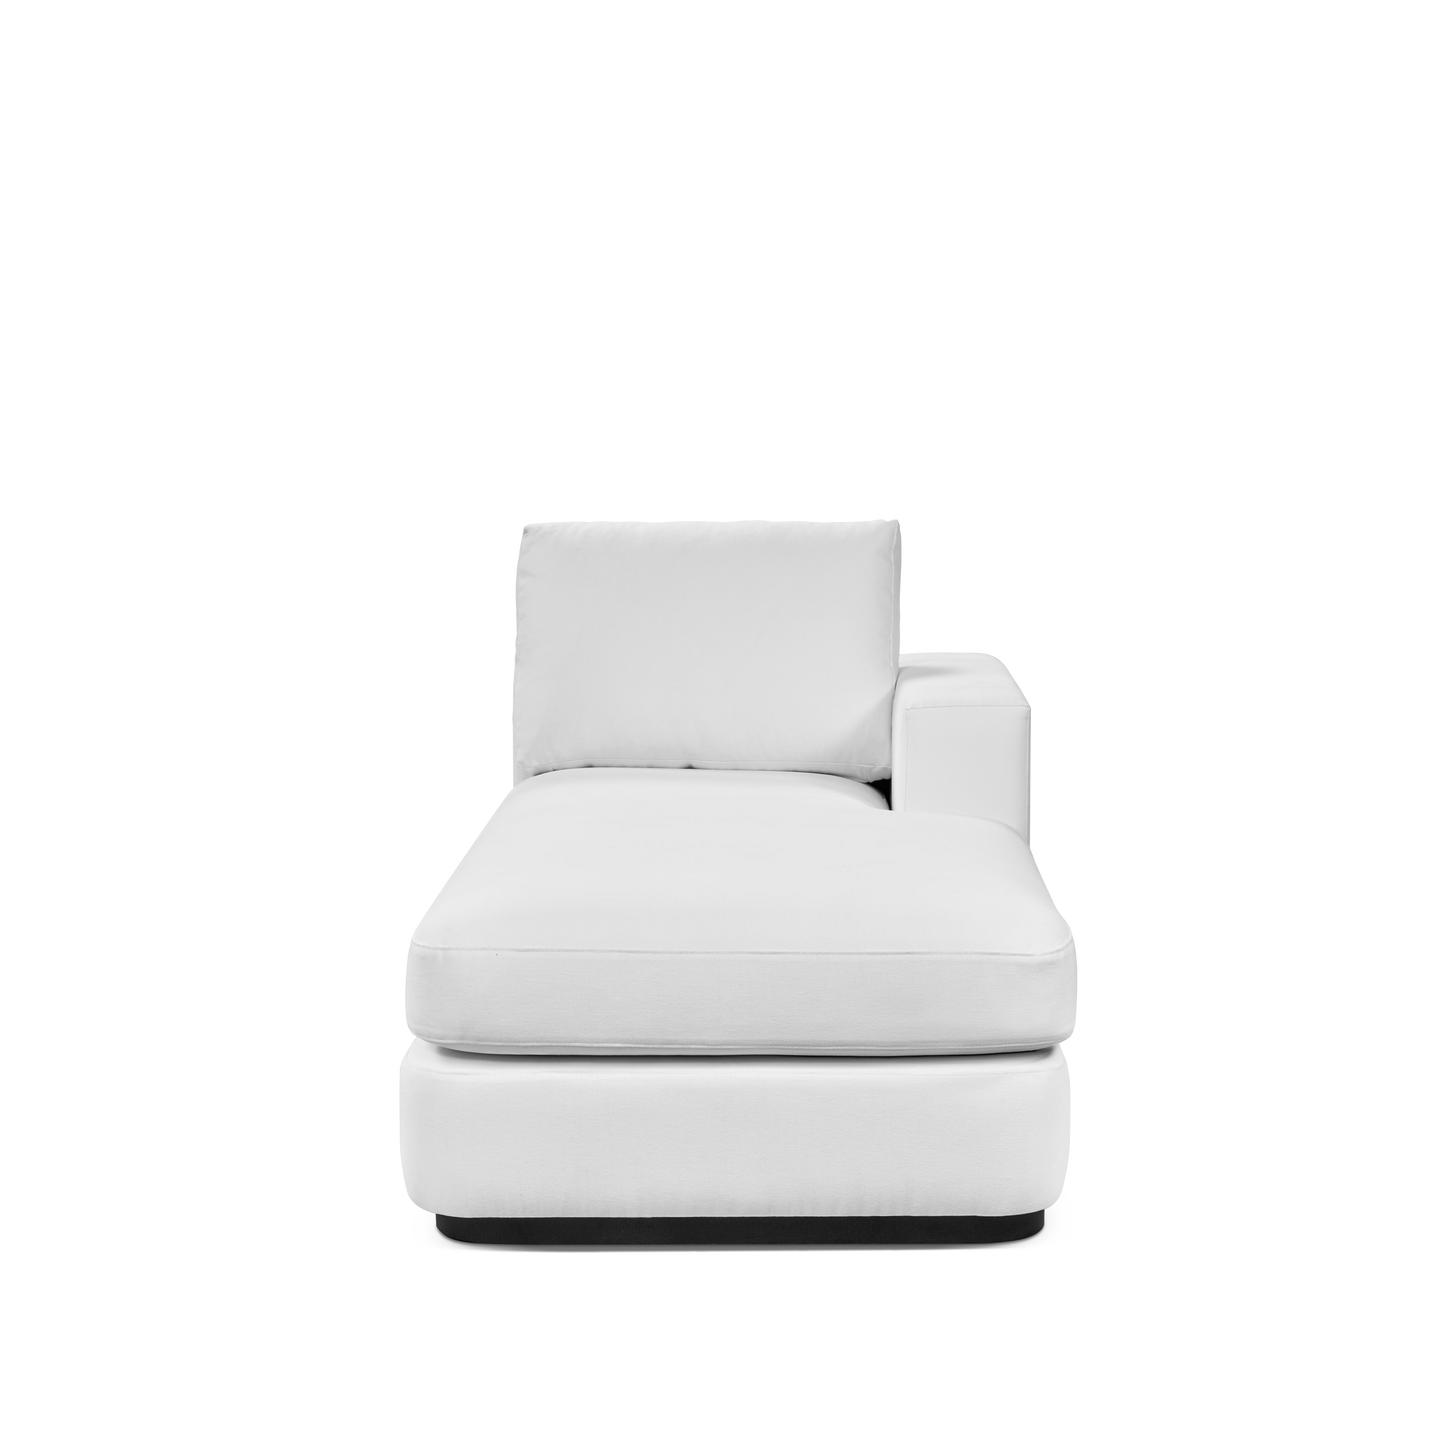 Front view ATLAS 90 Lounge Bed arm rest right